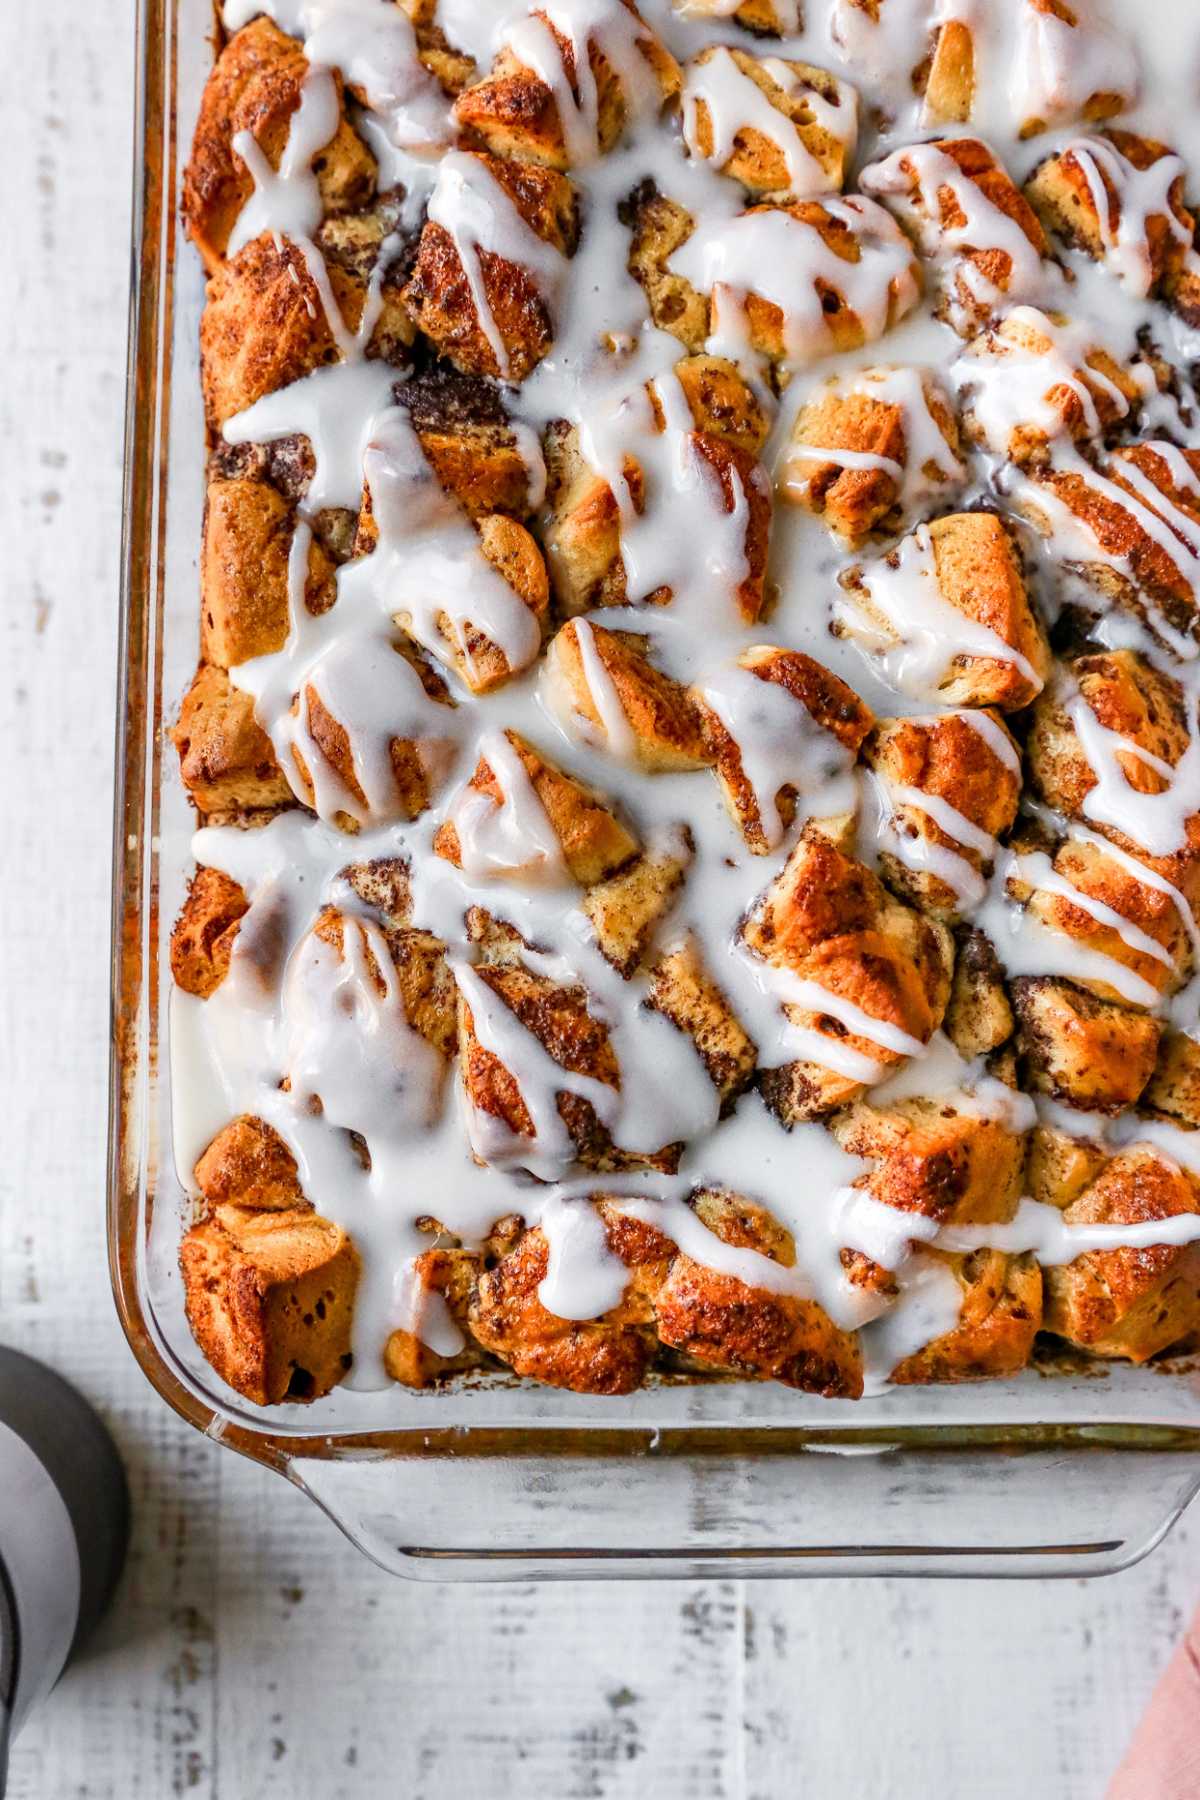 Cinnamon roll casserole topped with icing.